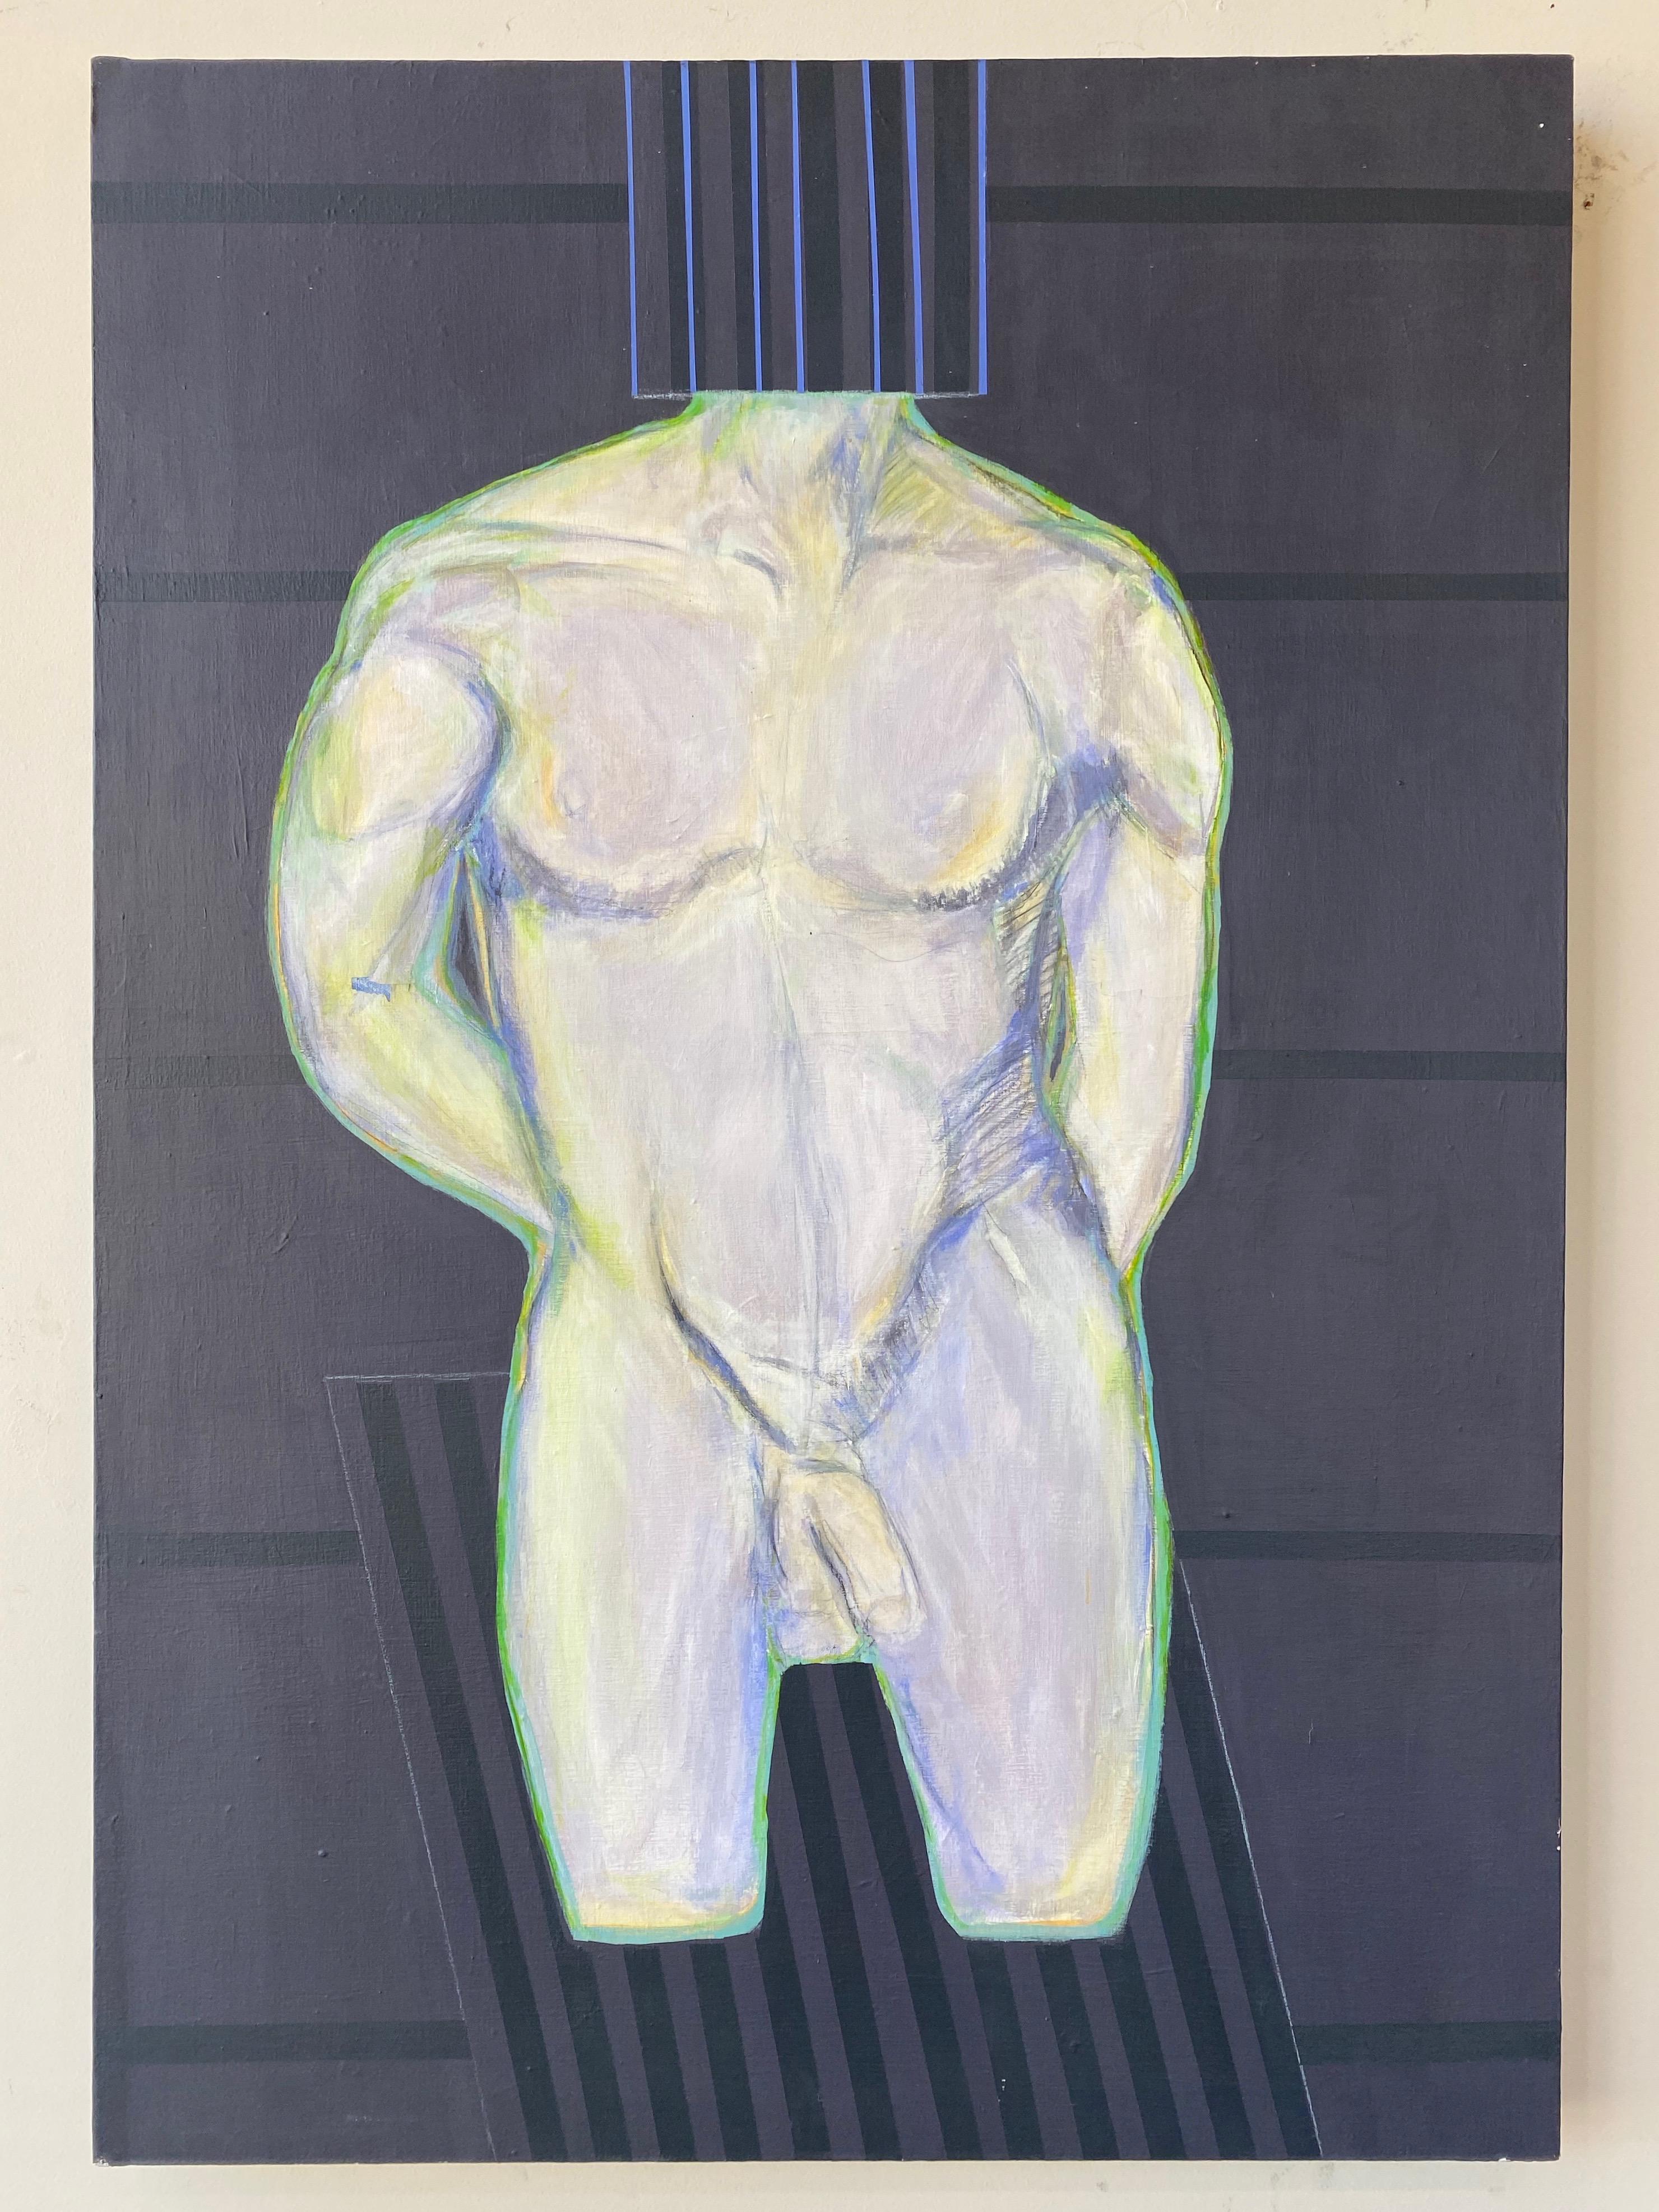 Robert English, Large Male Nude Abstract Expressionist Painting, 1980s For Sale 7